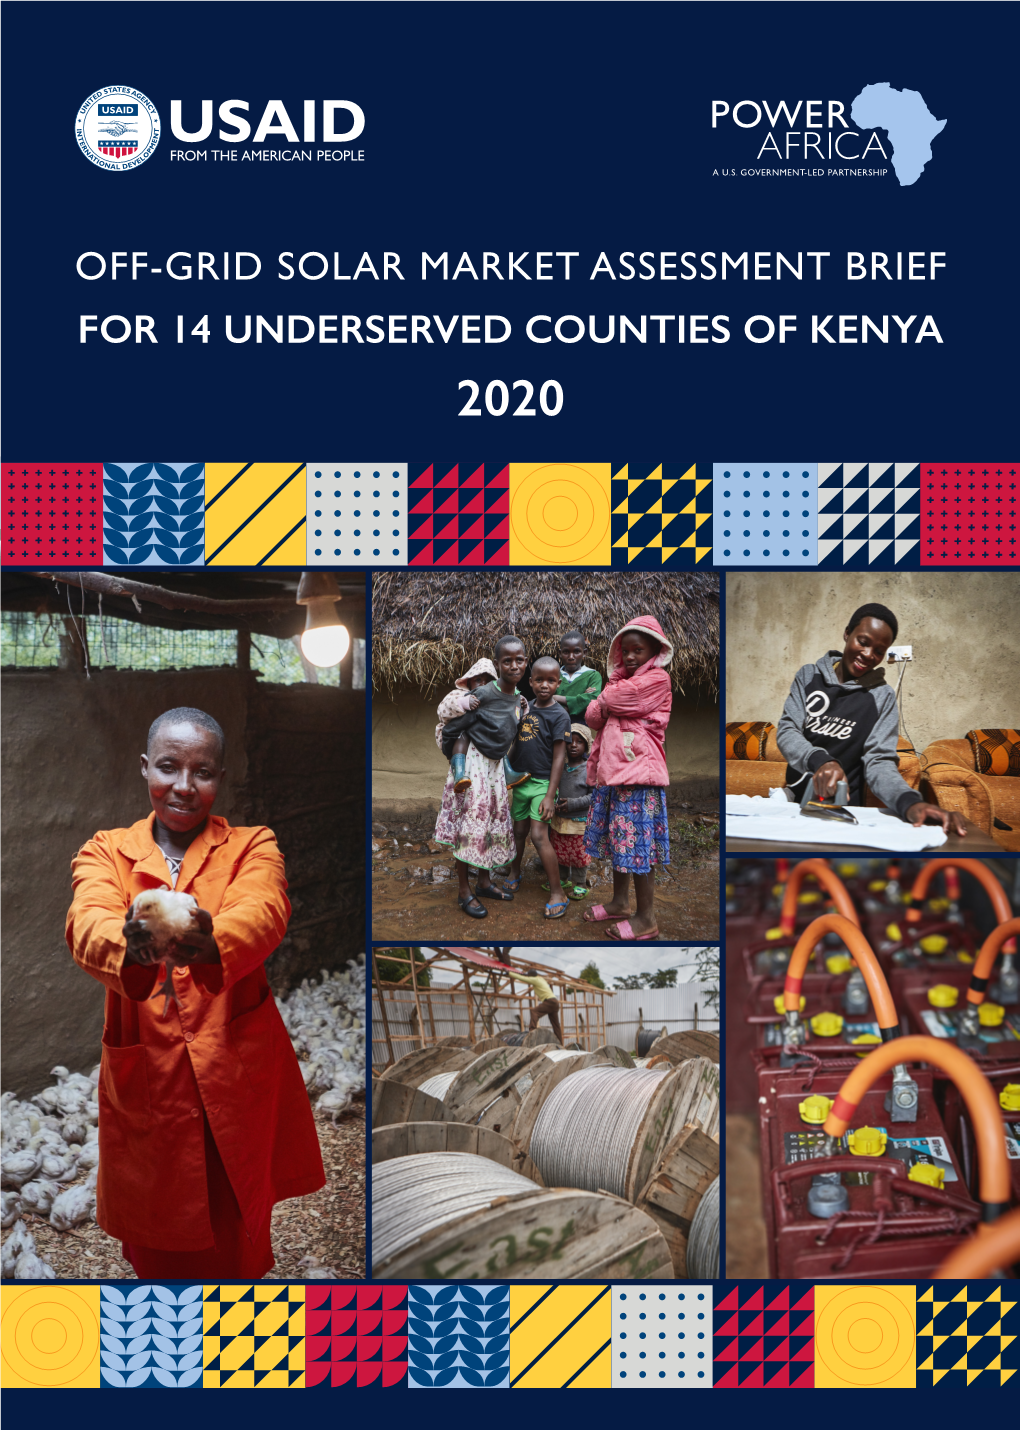 Off-Grid Solar Market Assessment Brief for 14 Underserved Counties of Kenya 2020